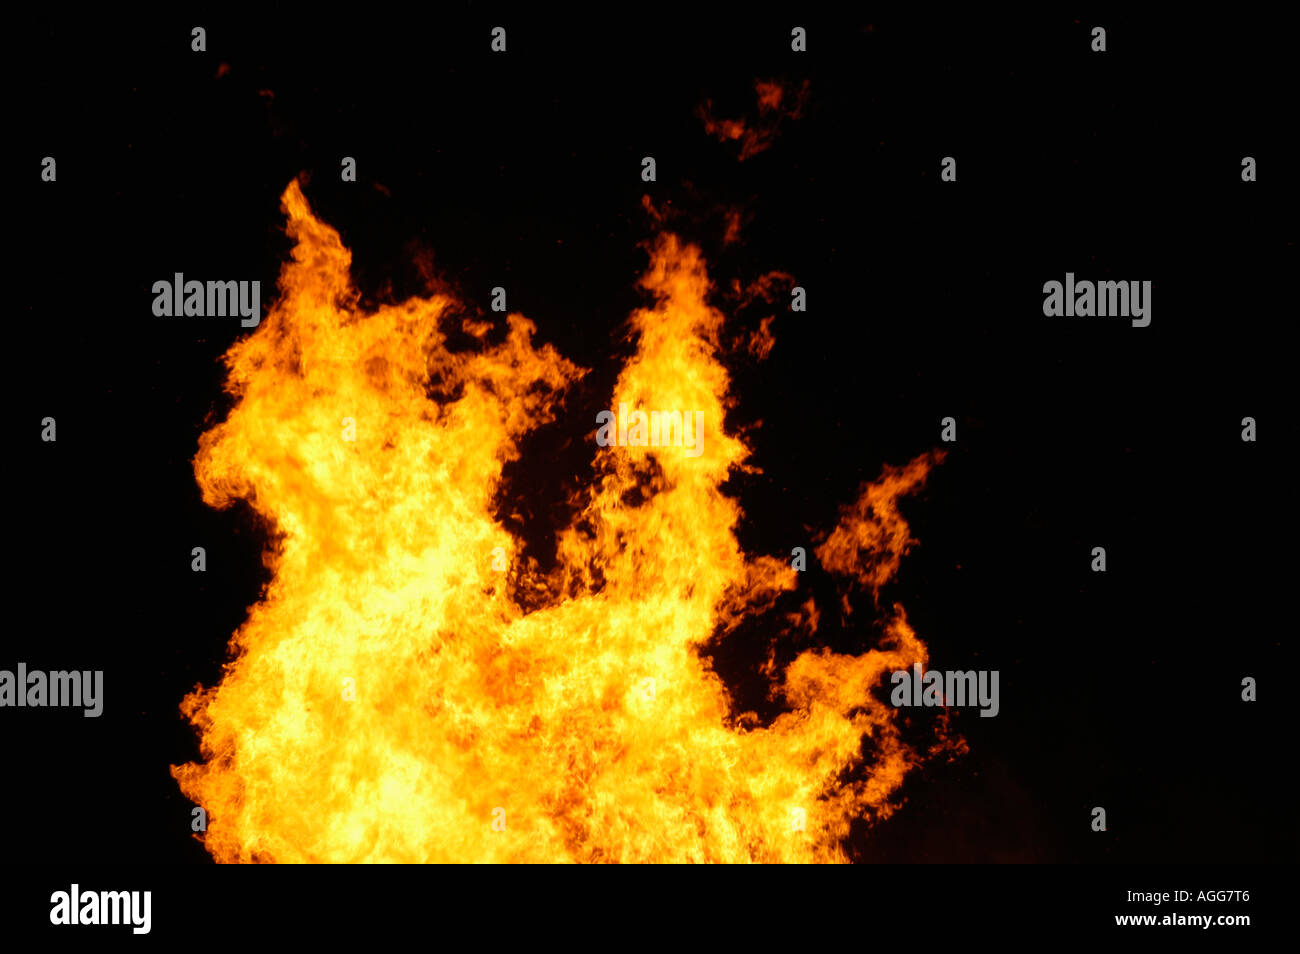 flame of blazing fire Stock Photo